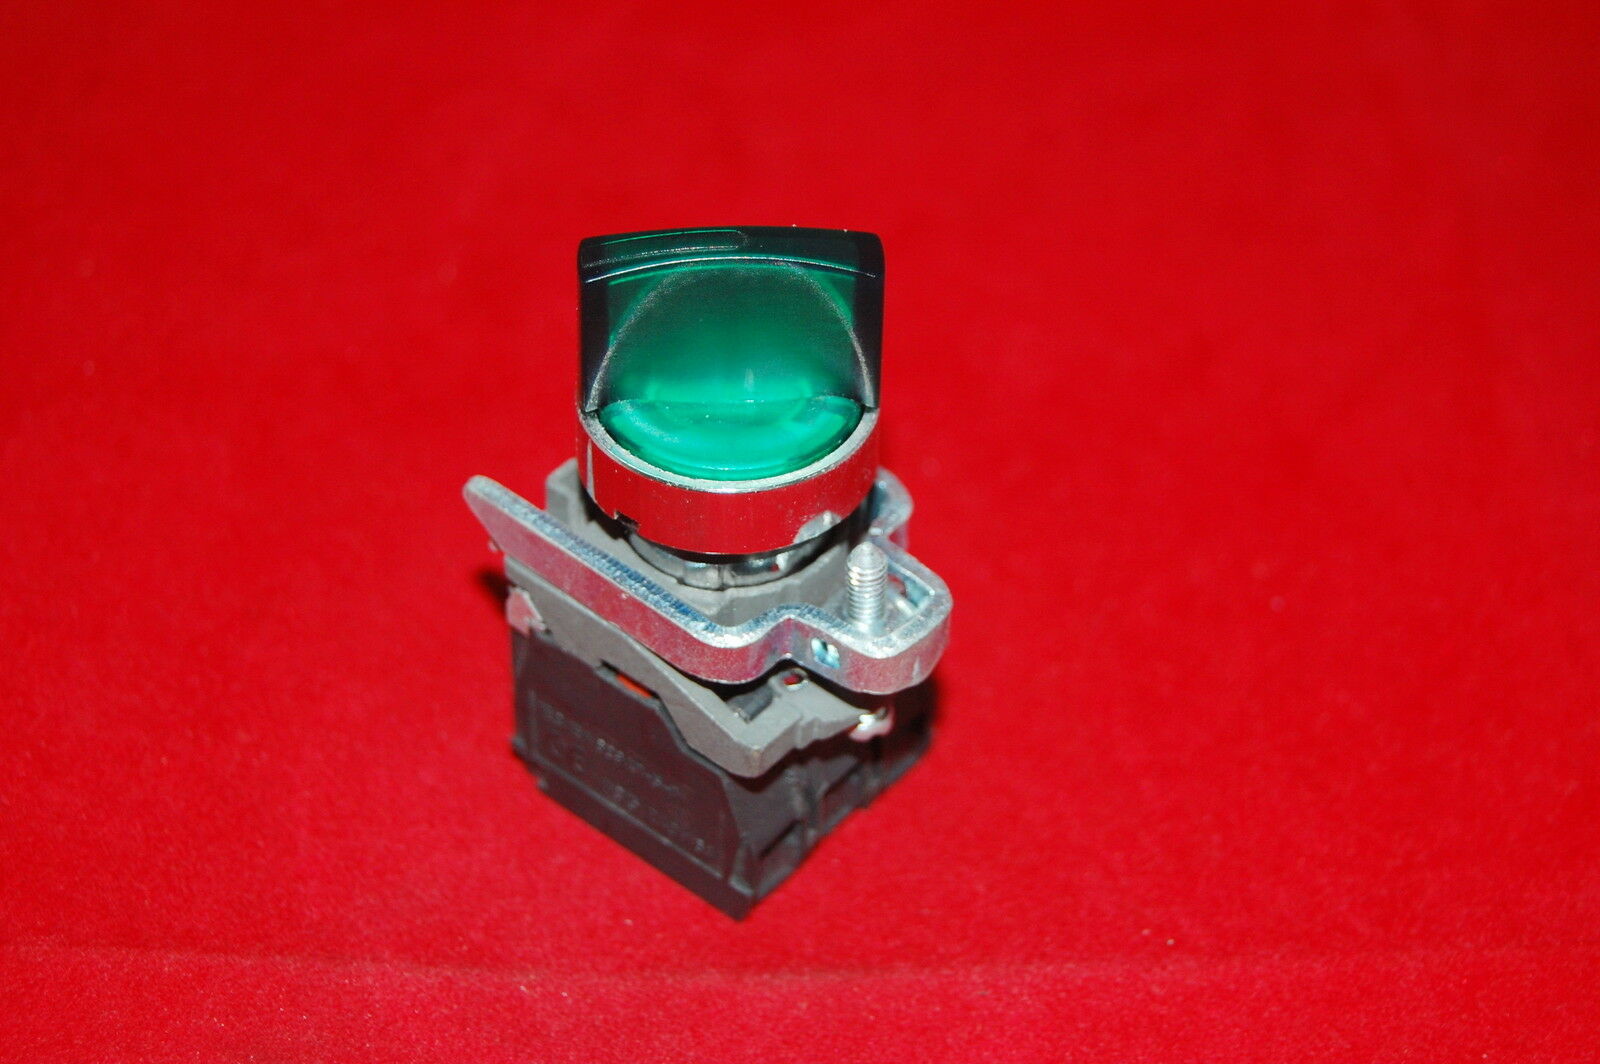 22mm ILlUMINATED Selector switch 3 Position Fits Green XB4BK153G5 120V Momentary